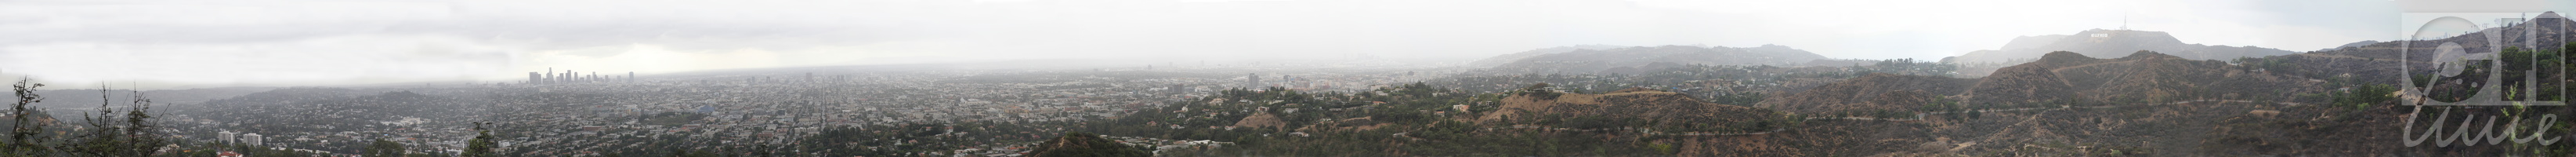 Los Angeles by Day - Panorama